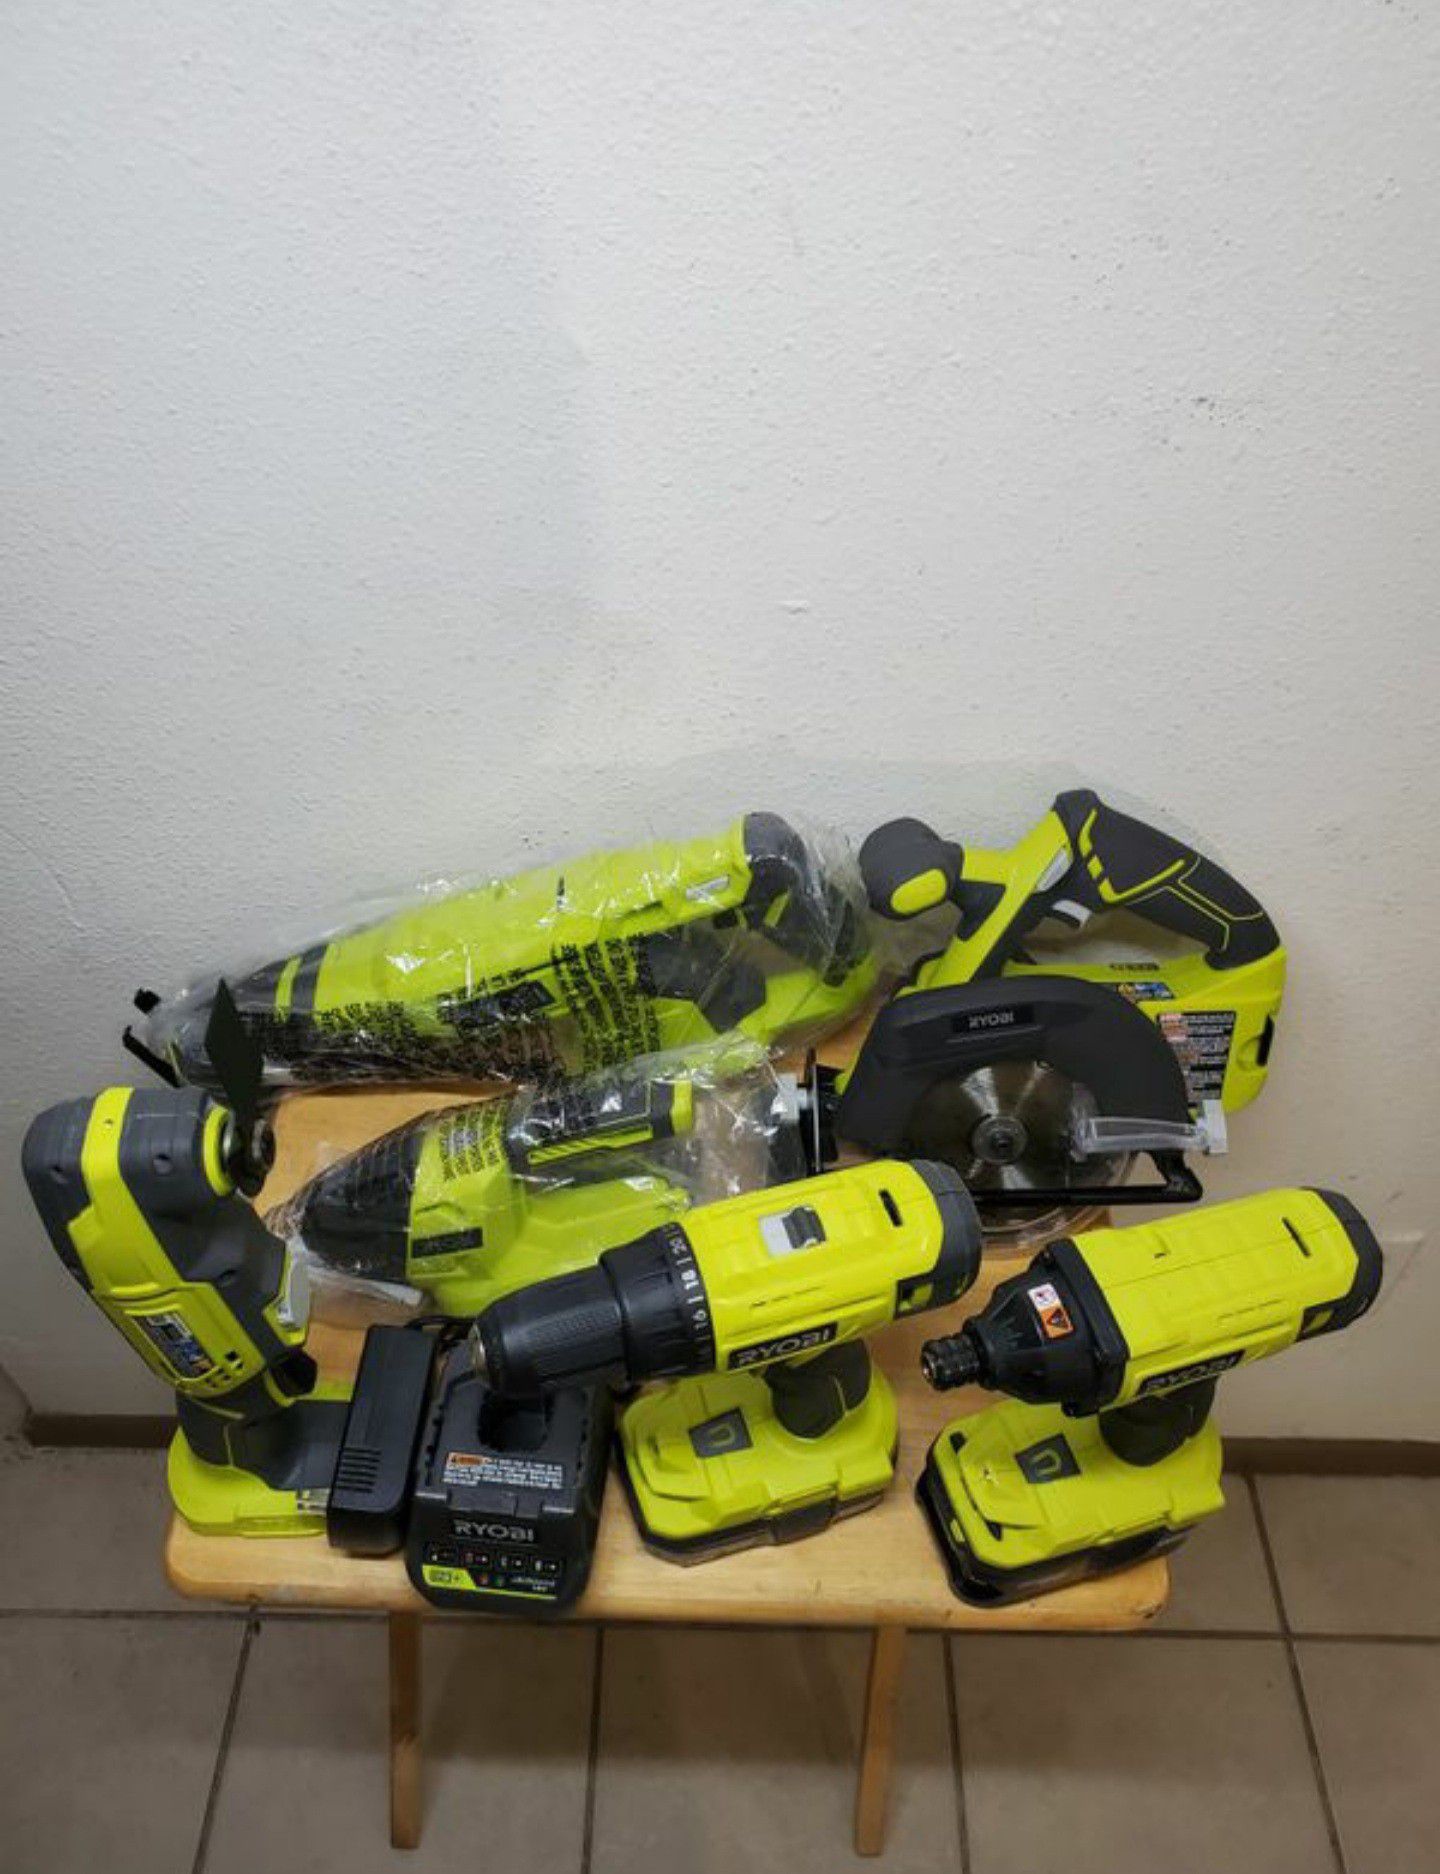 RYOBI 18-Volt ONE+ Lithium-Ion Cordless 6-Tool Combo Kit with (2) Batteries, Charger, and Bag